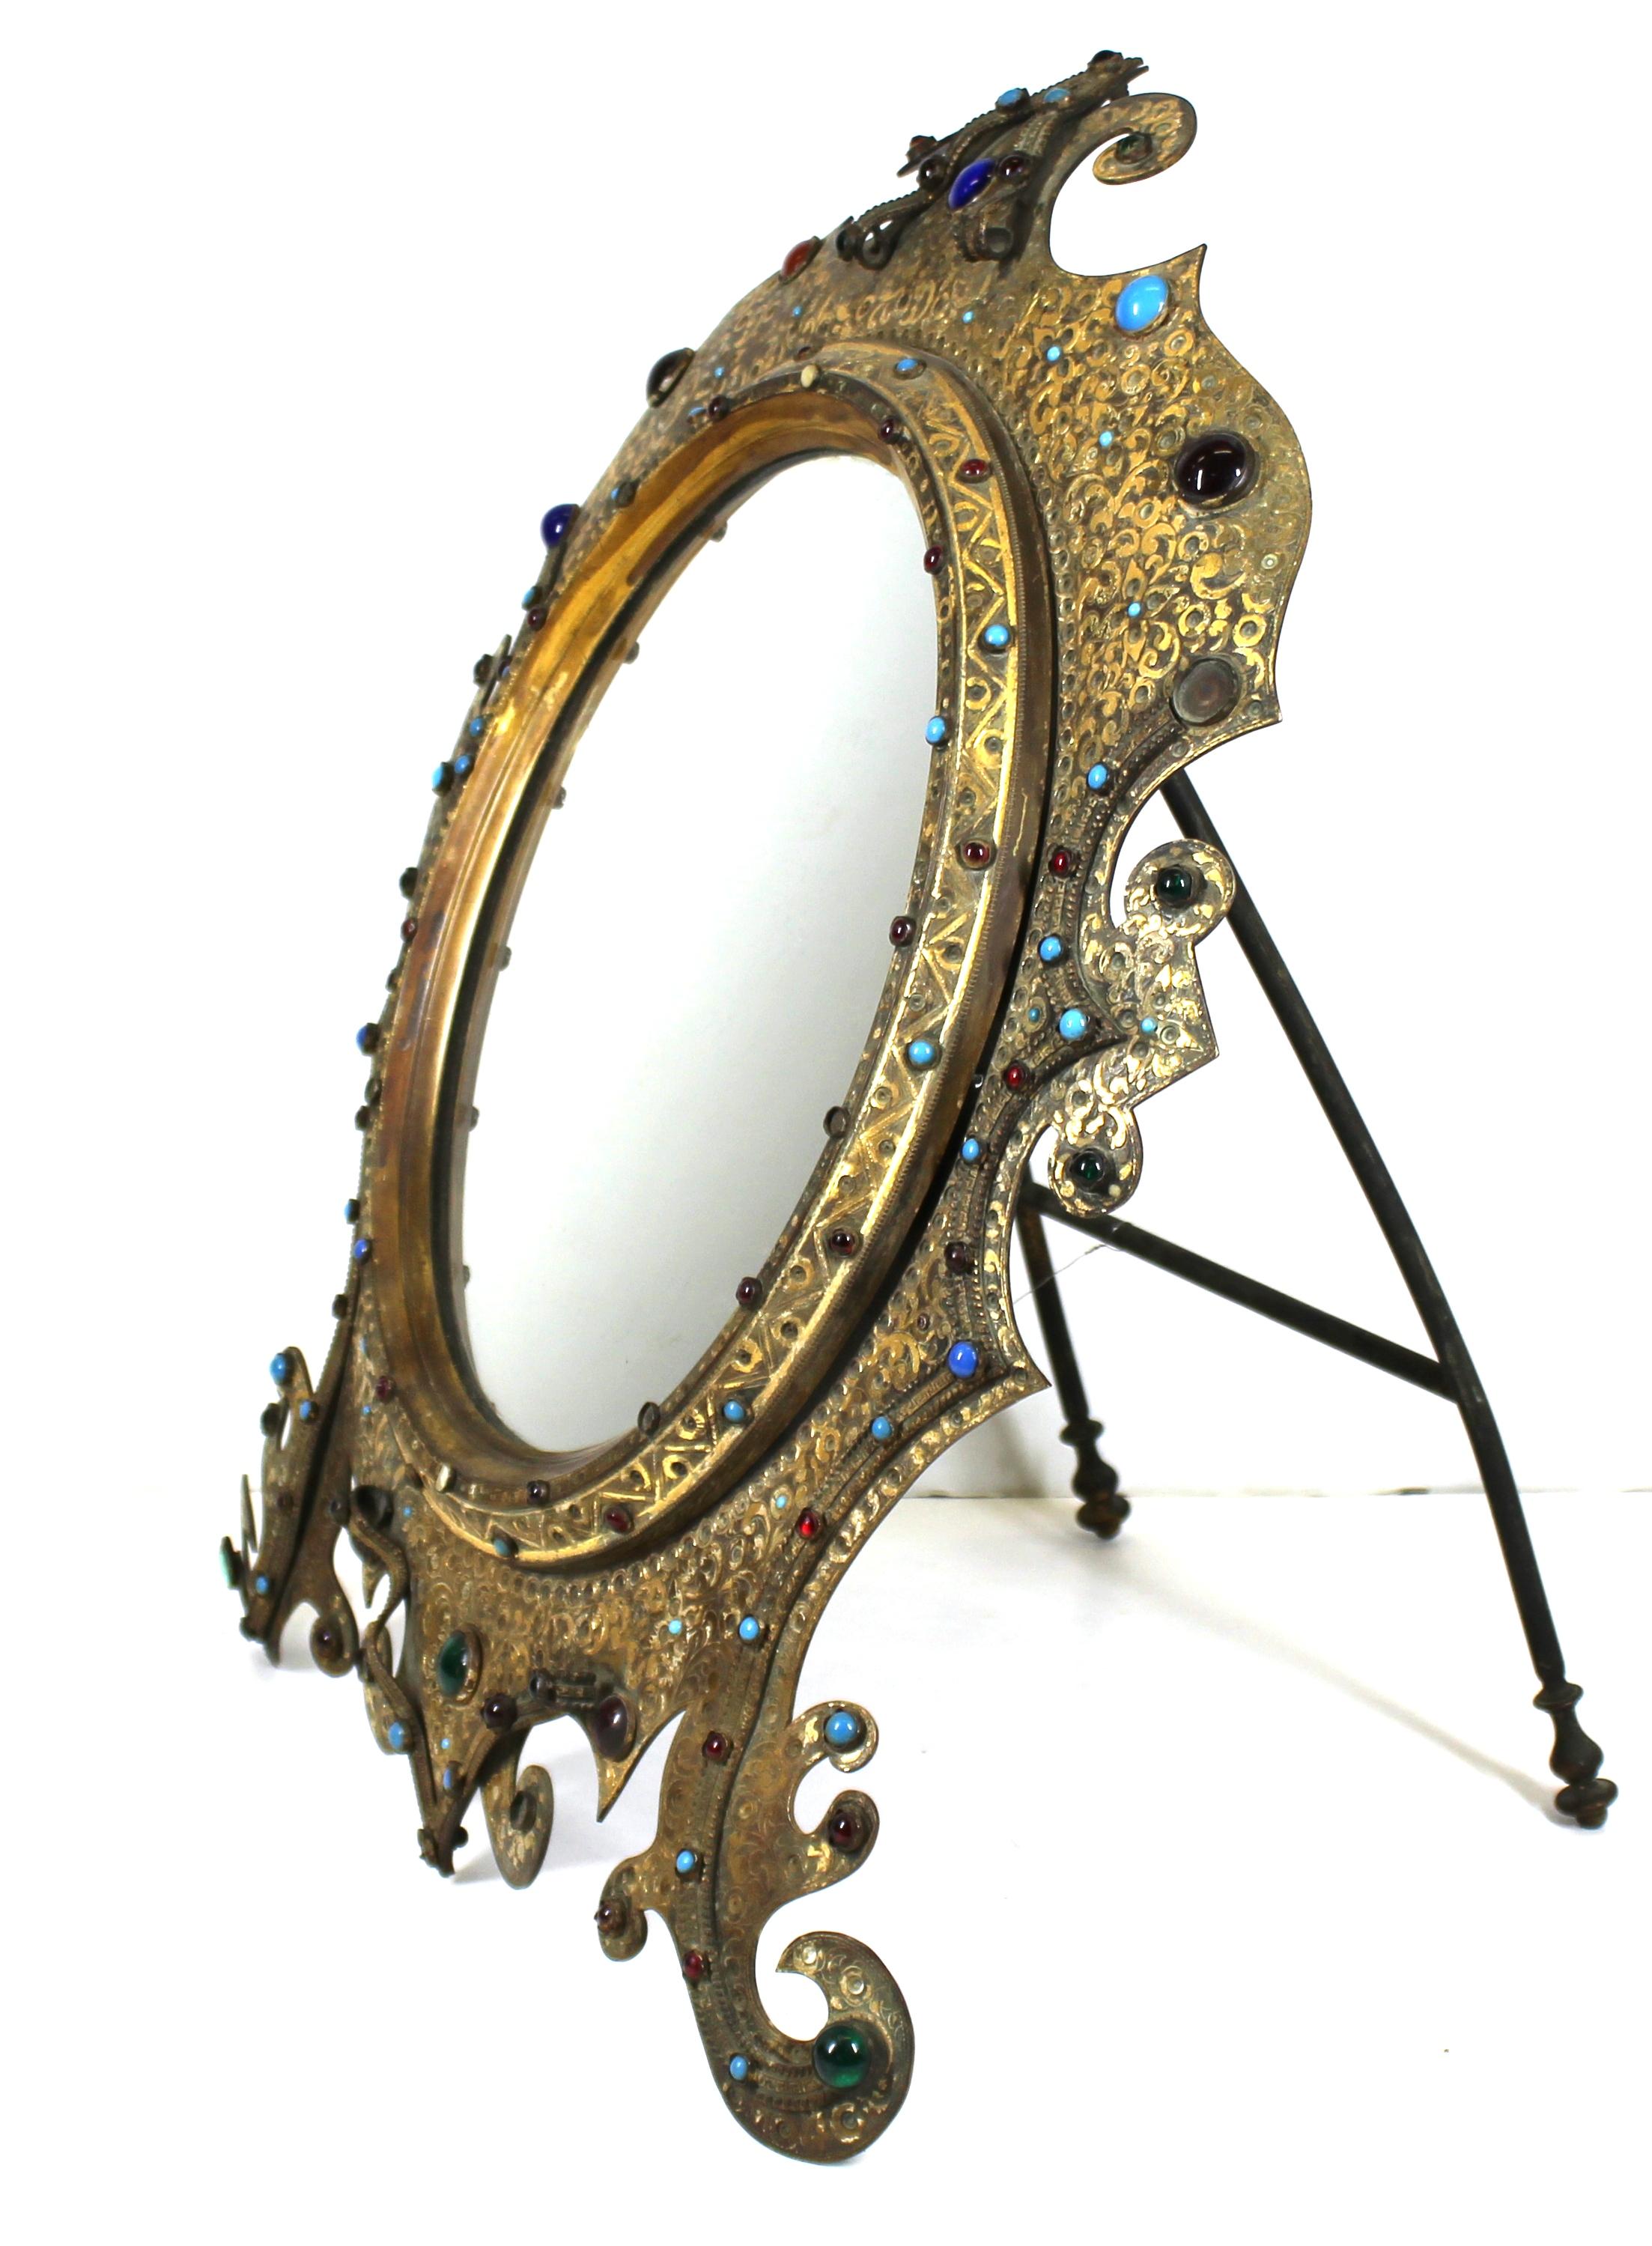 Austrian Moorish Revival Gilded Bronze Enameled and Bejeweled Oval Table Mirror For Sale 4